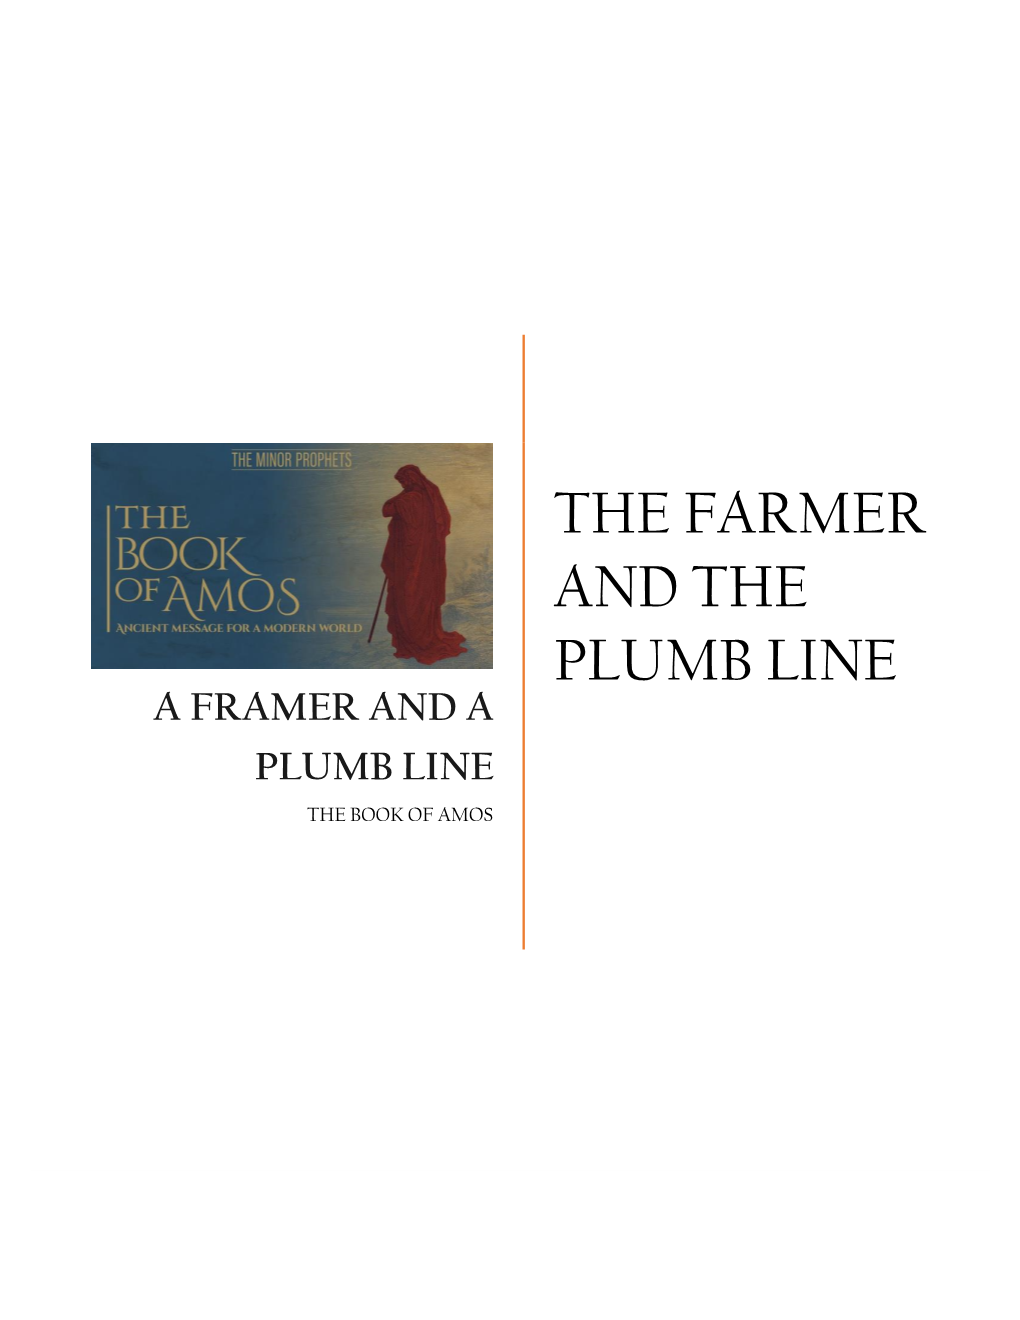 A Framer and a Plumb Line